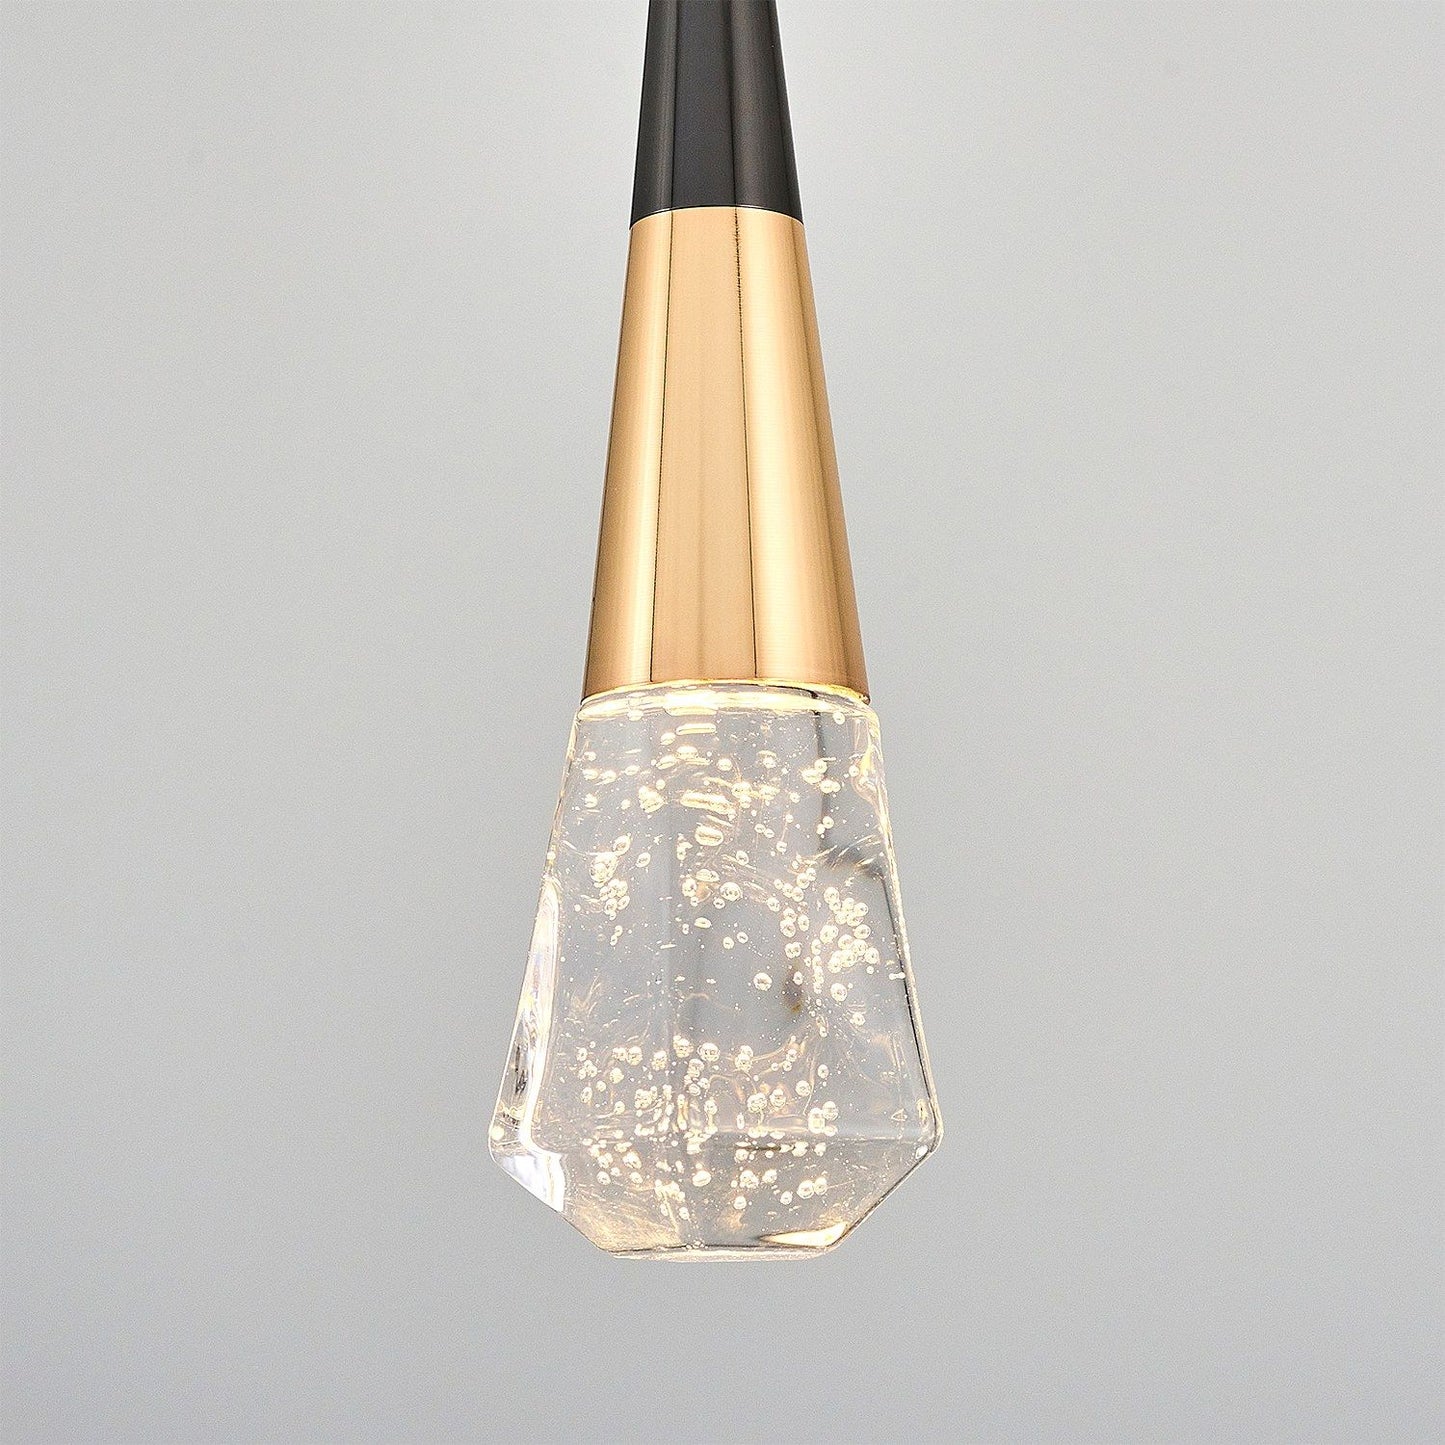 2817-6A - Chandelier